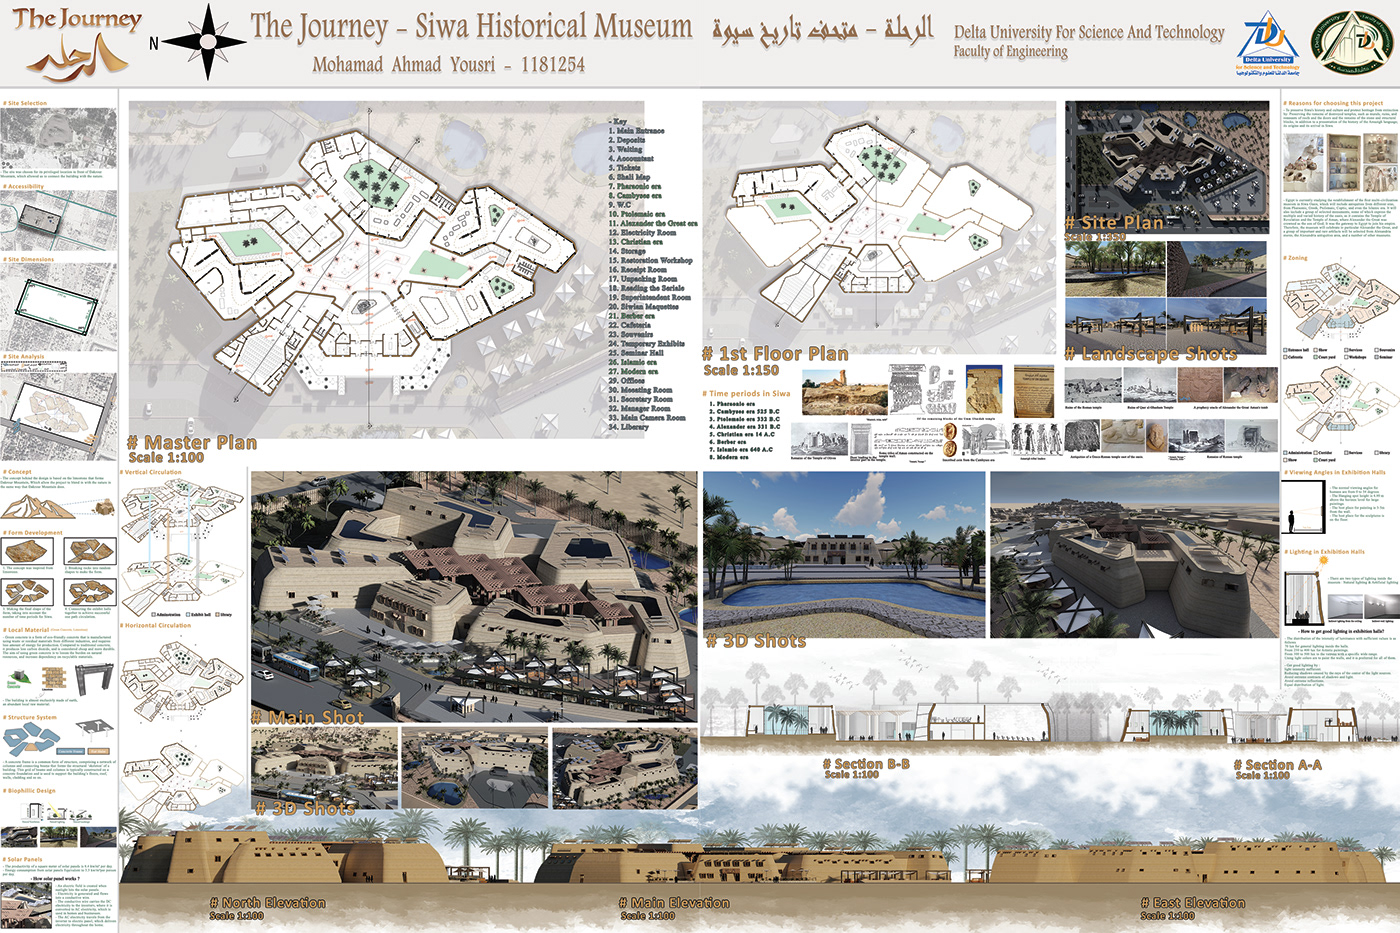 graduation project architecture museum siwa Biophilic Design concept Render historical historical museum Siwa Oasis